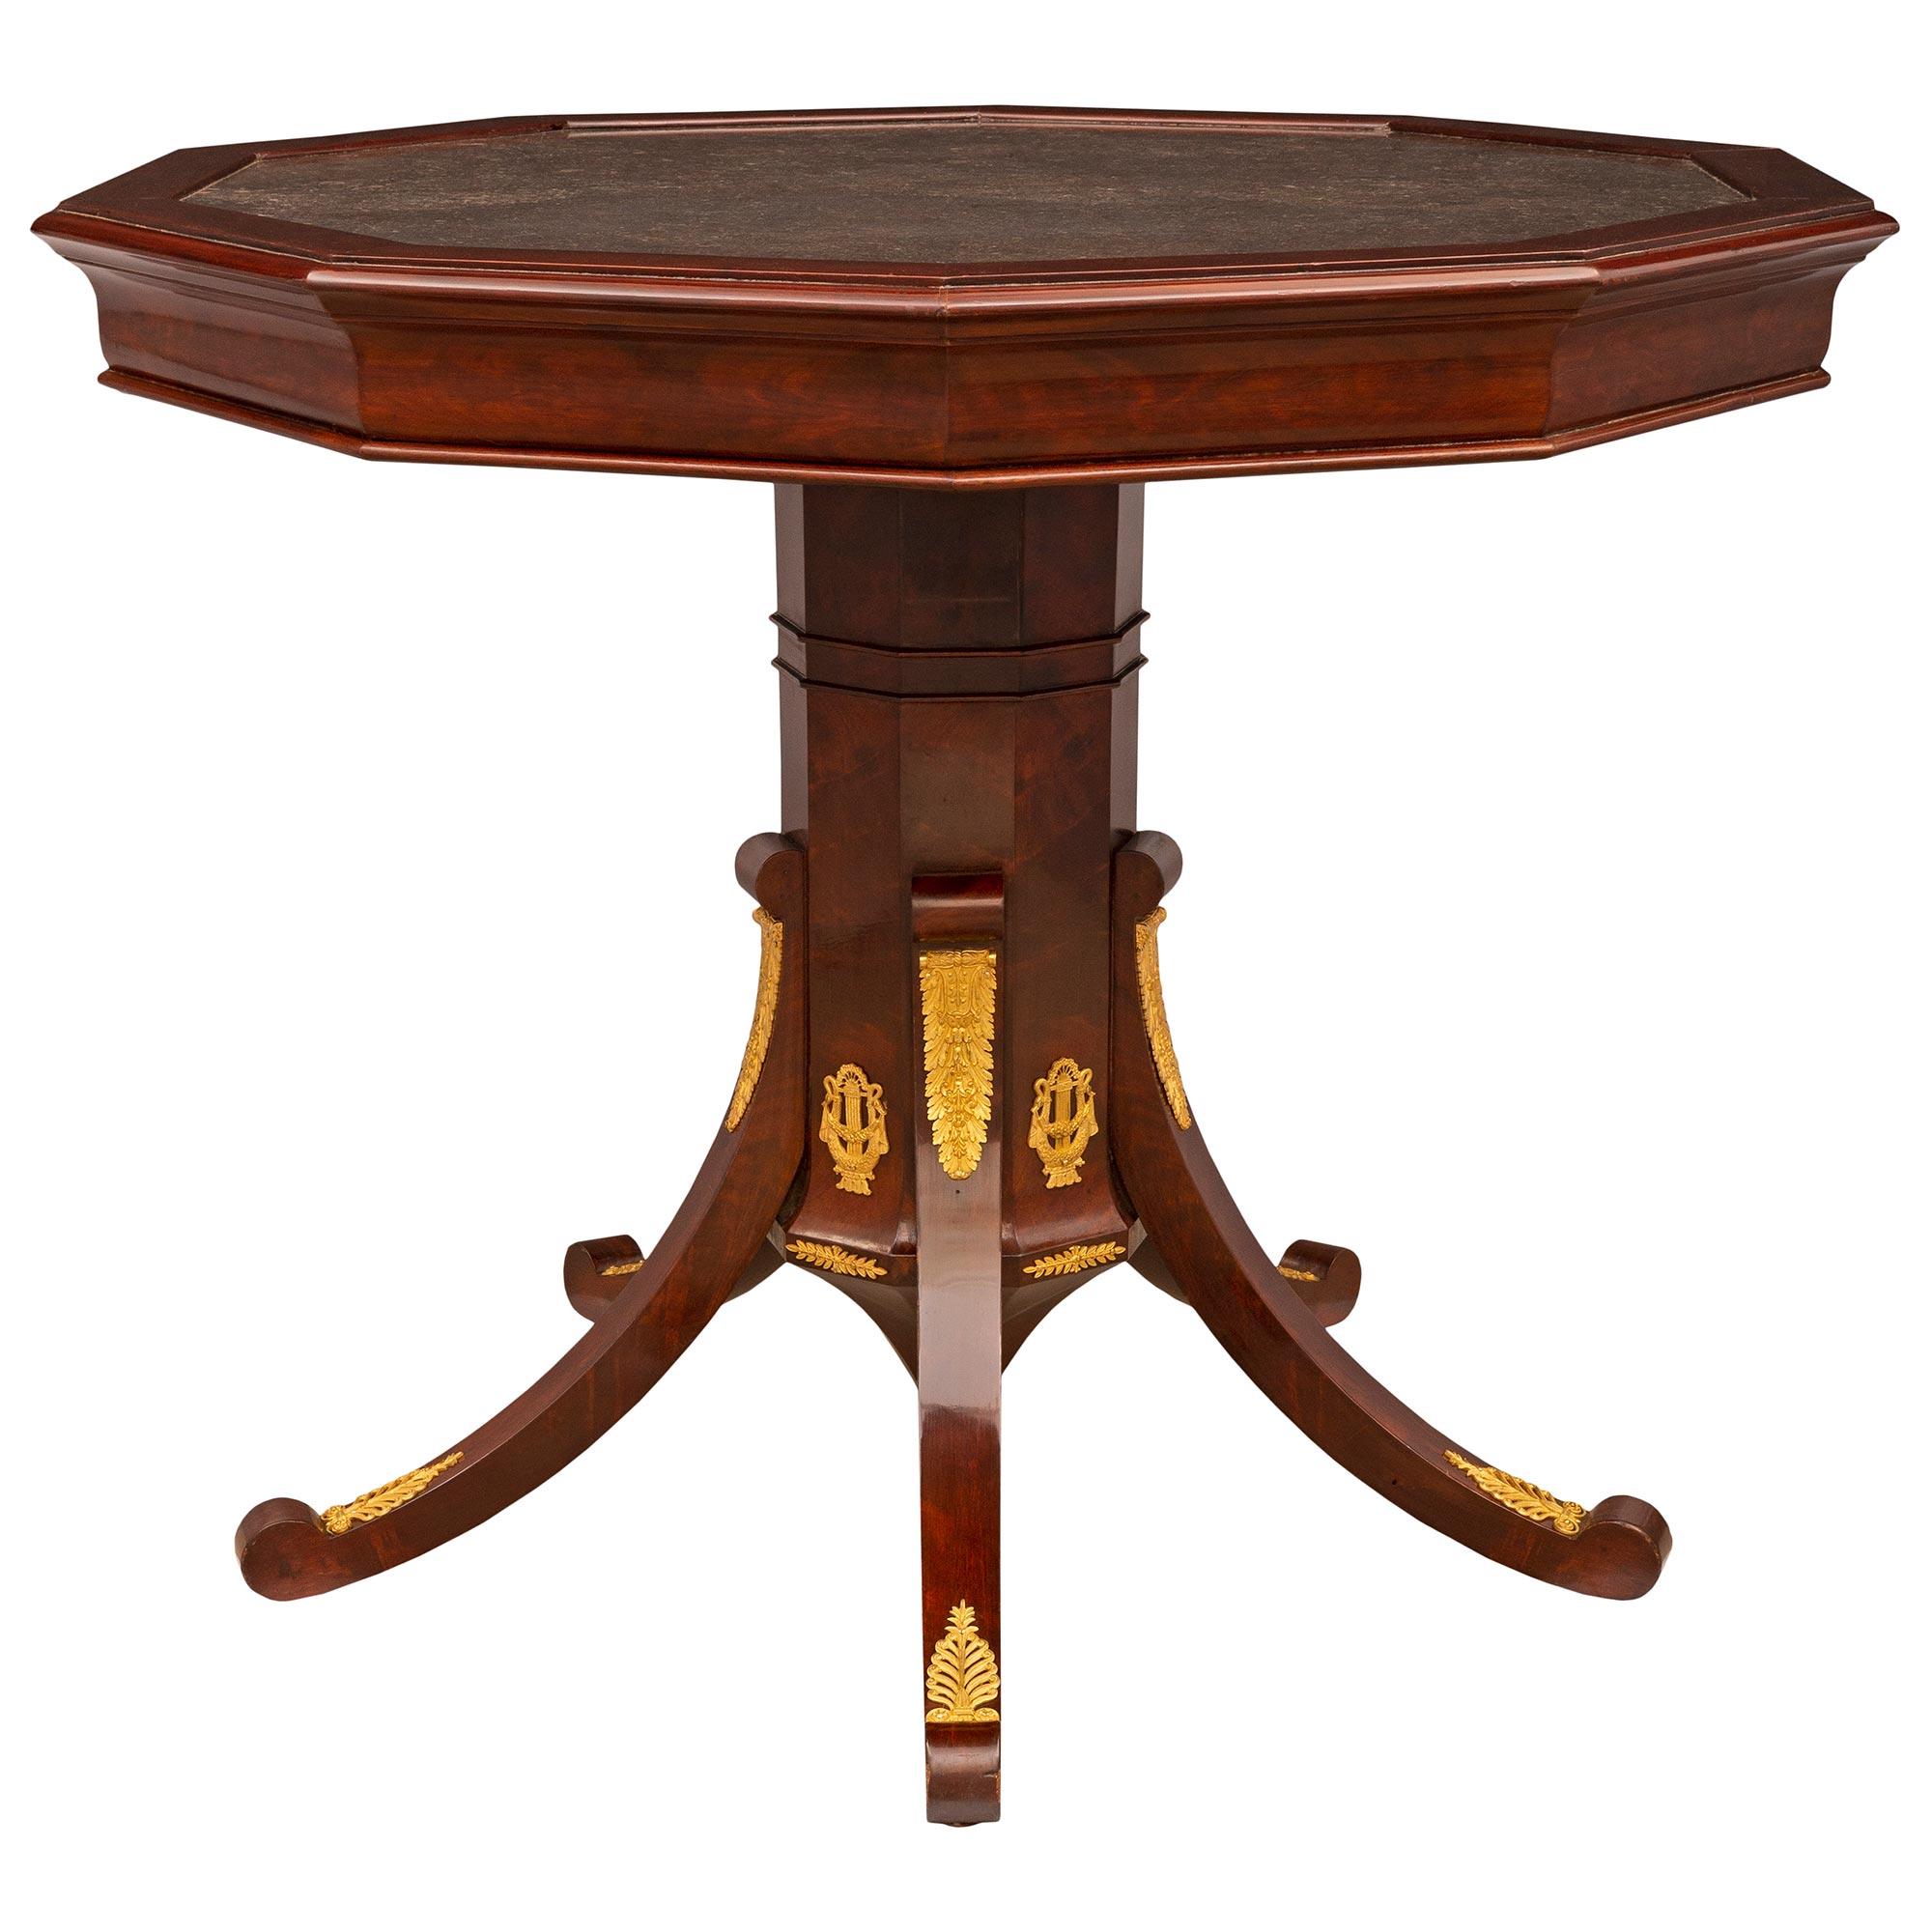 Italian 19th Century Neoclassical Empire Style Mahogany and Ormolu Center Table In Good Condition For Sale In West Palm Beach, FL